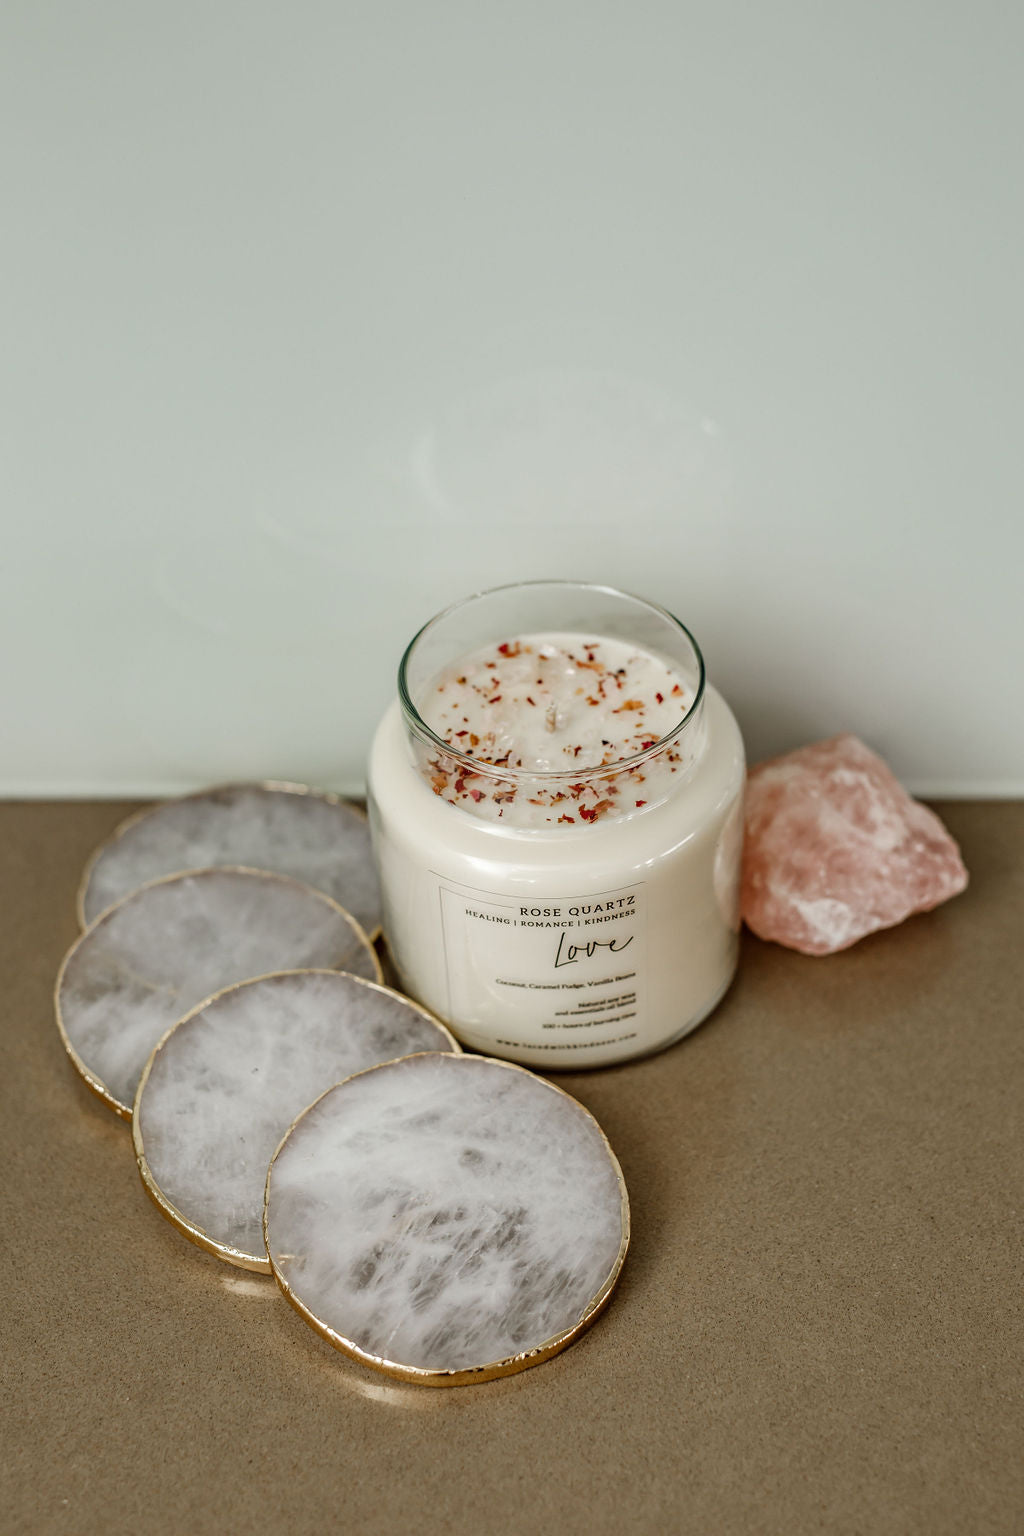 Candle Crystal Homewares Love Rose Quartz. Scent is Coconut, Caramel Fudge, Vanilla Bean. Candle is Glass, with crystal and four crystal coasters